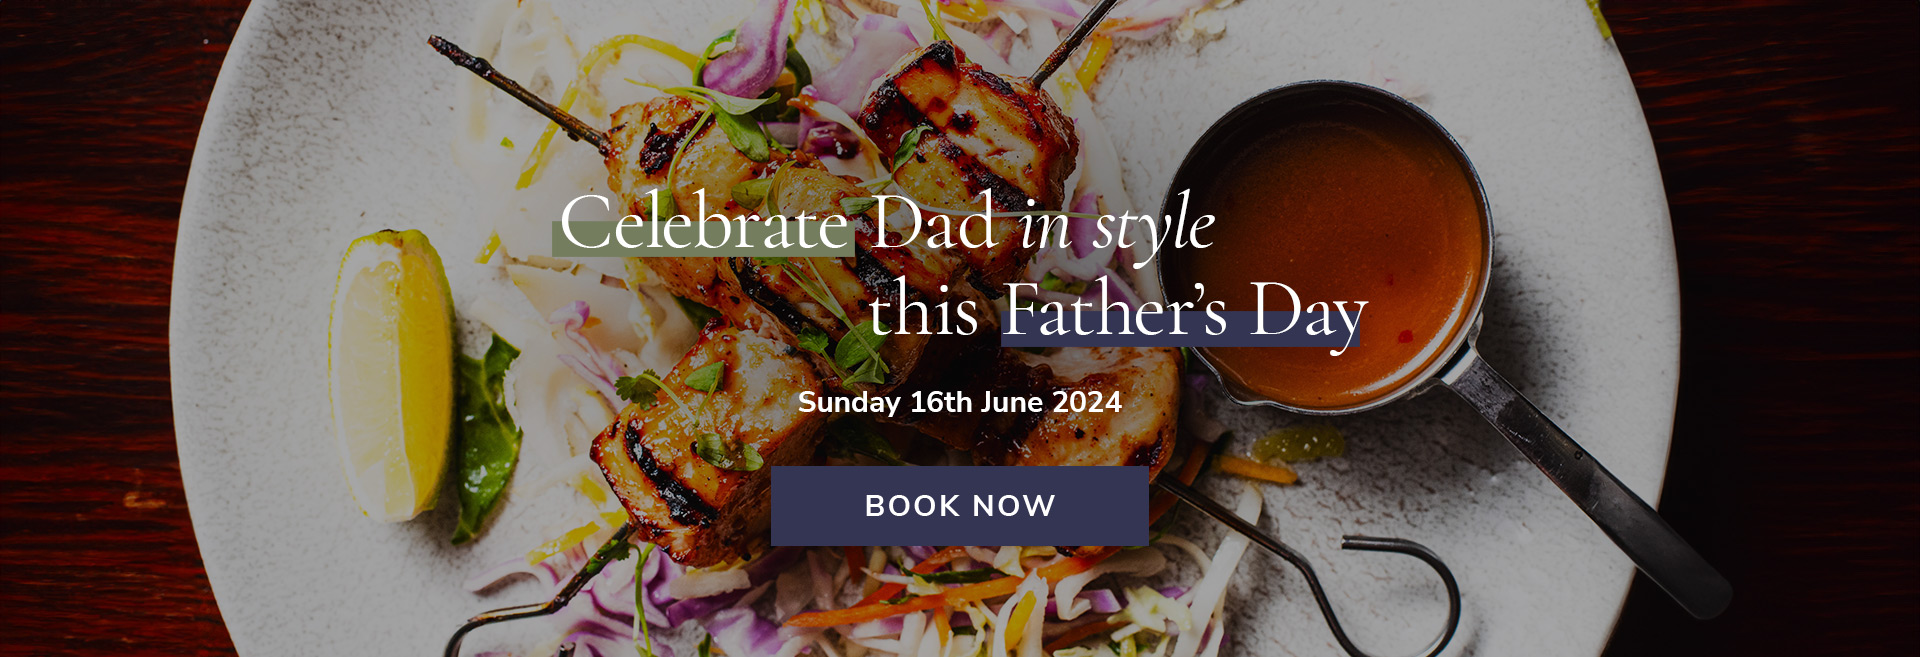 Father's Day at The Queen's Arms